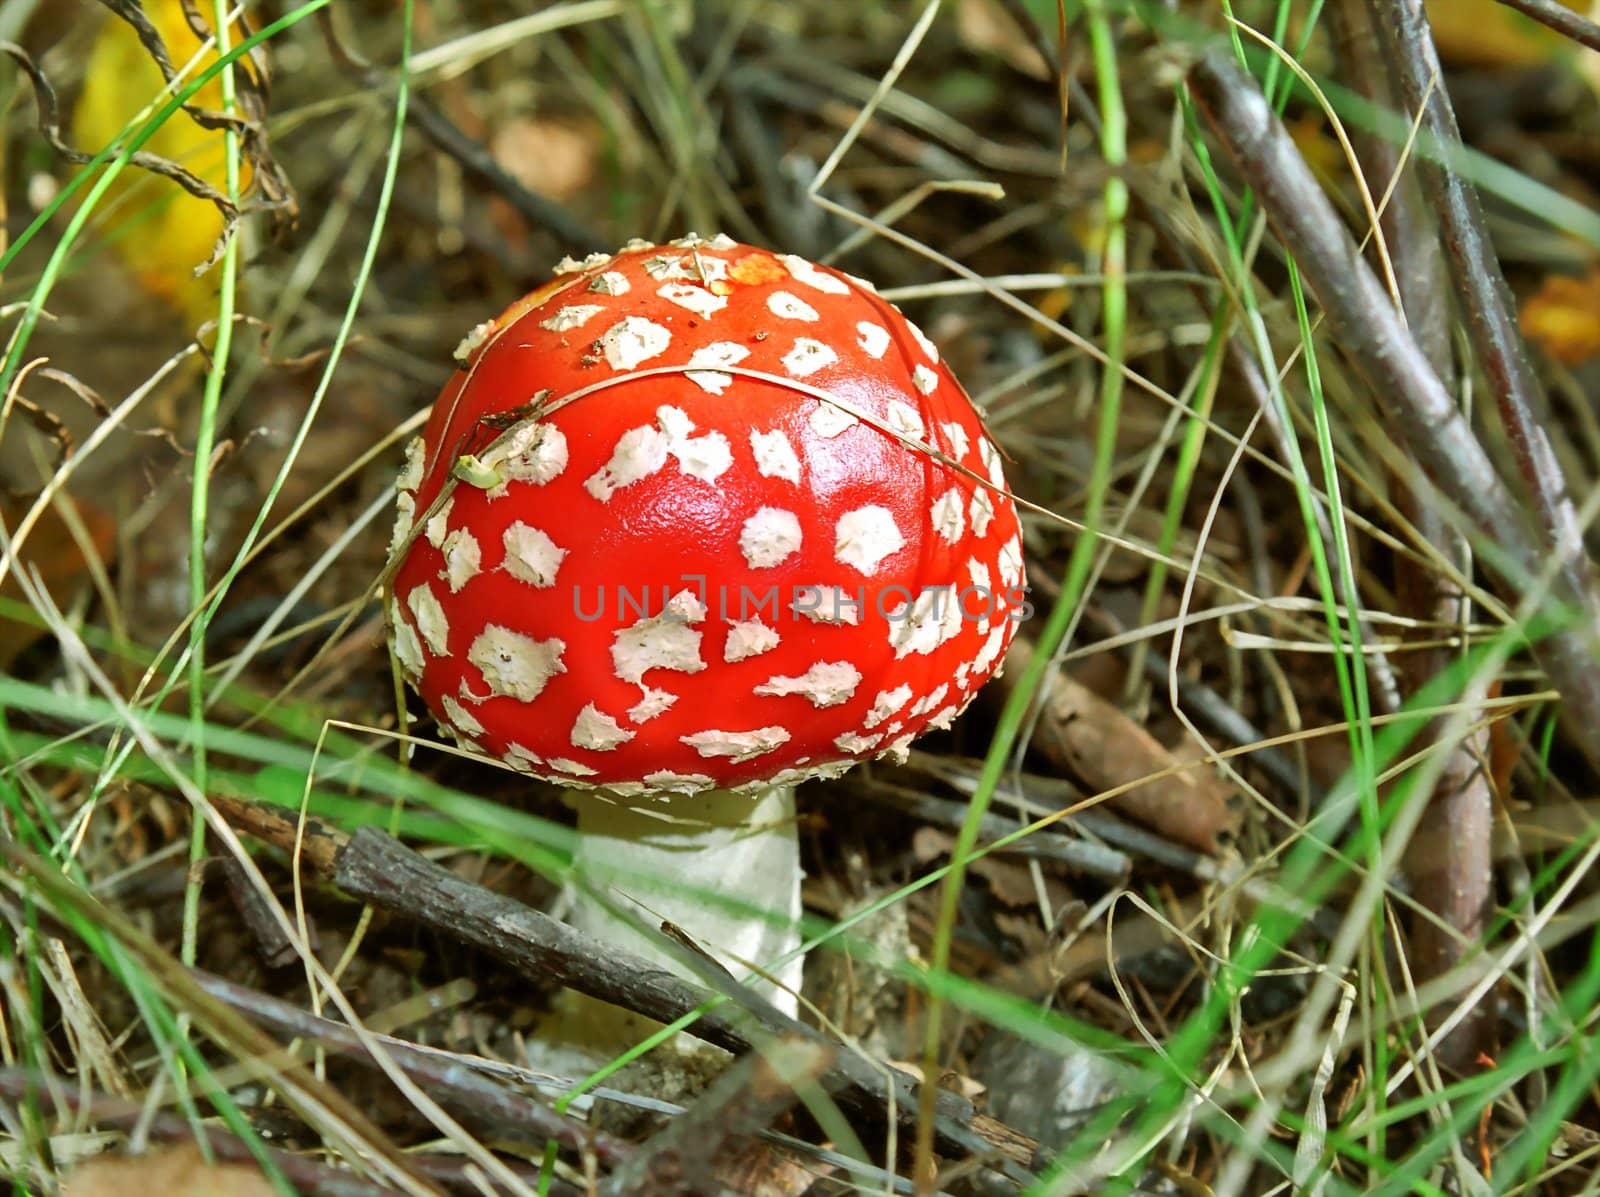 Fly agaric among grass and branches in autumn forest